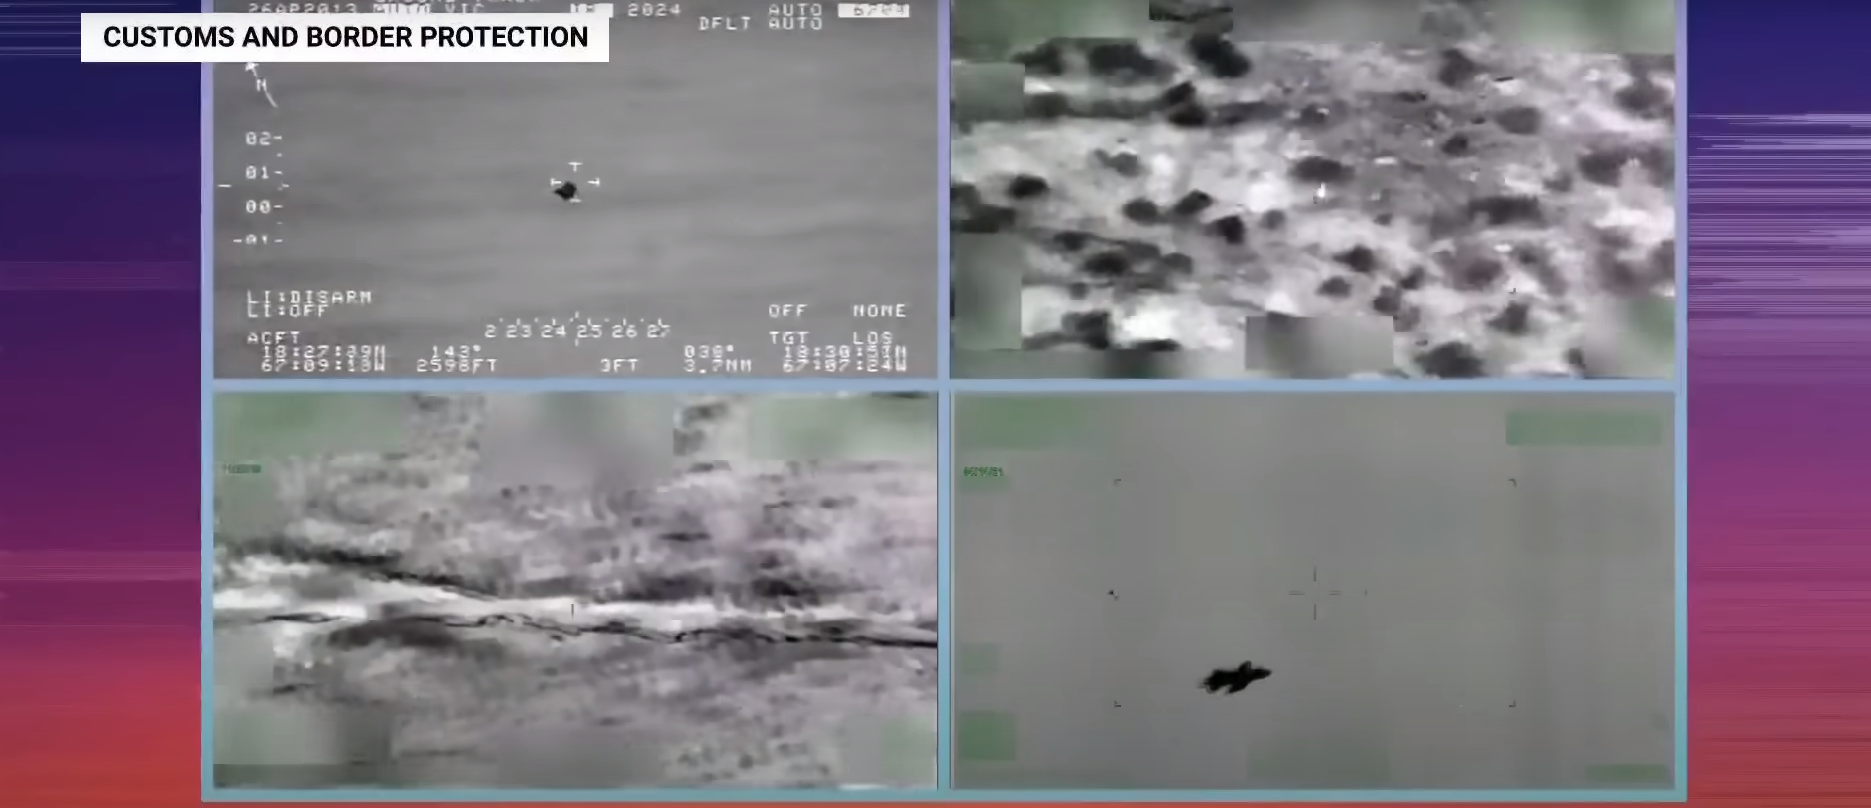 U.S. Customs and Border Protection (CBP) UFO Documents and Videos Come